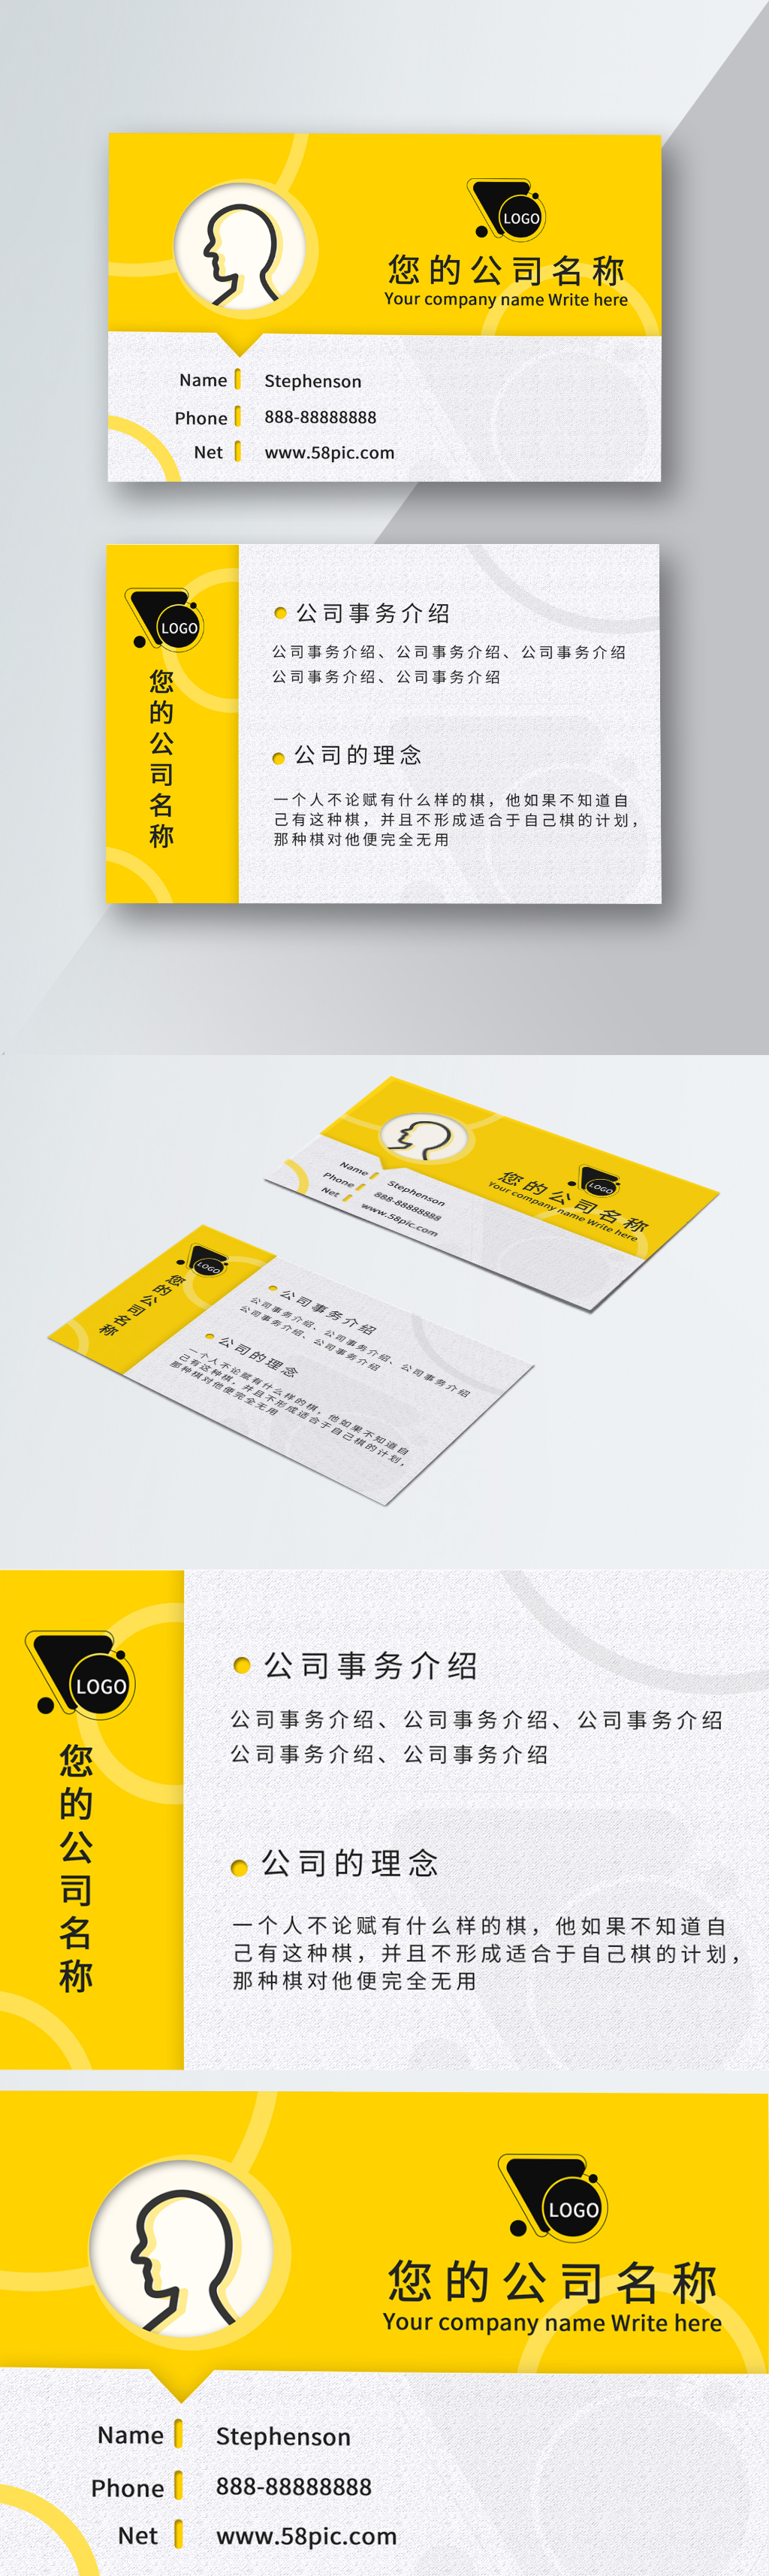 Download Yellow Black Color Business Card Template Image Picture Free Download 728843760 Lovepik Com PSD Mockup Templates